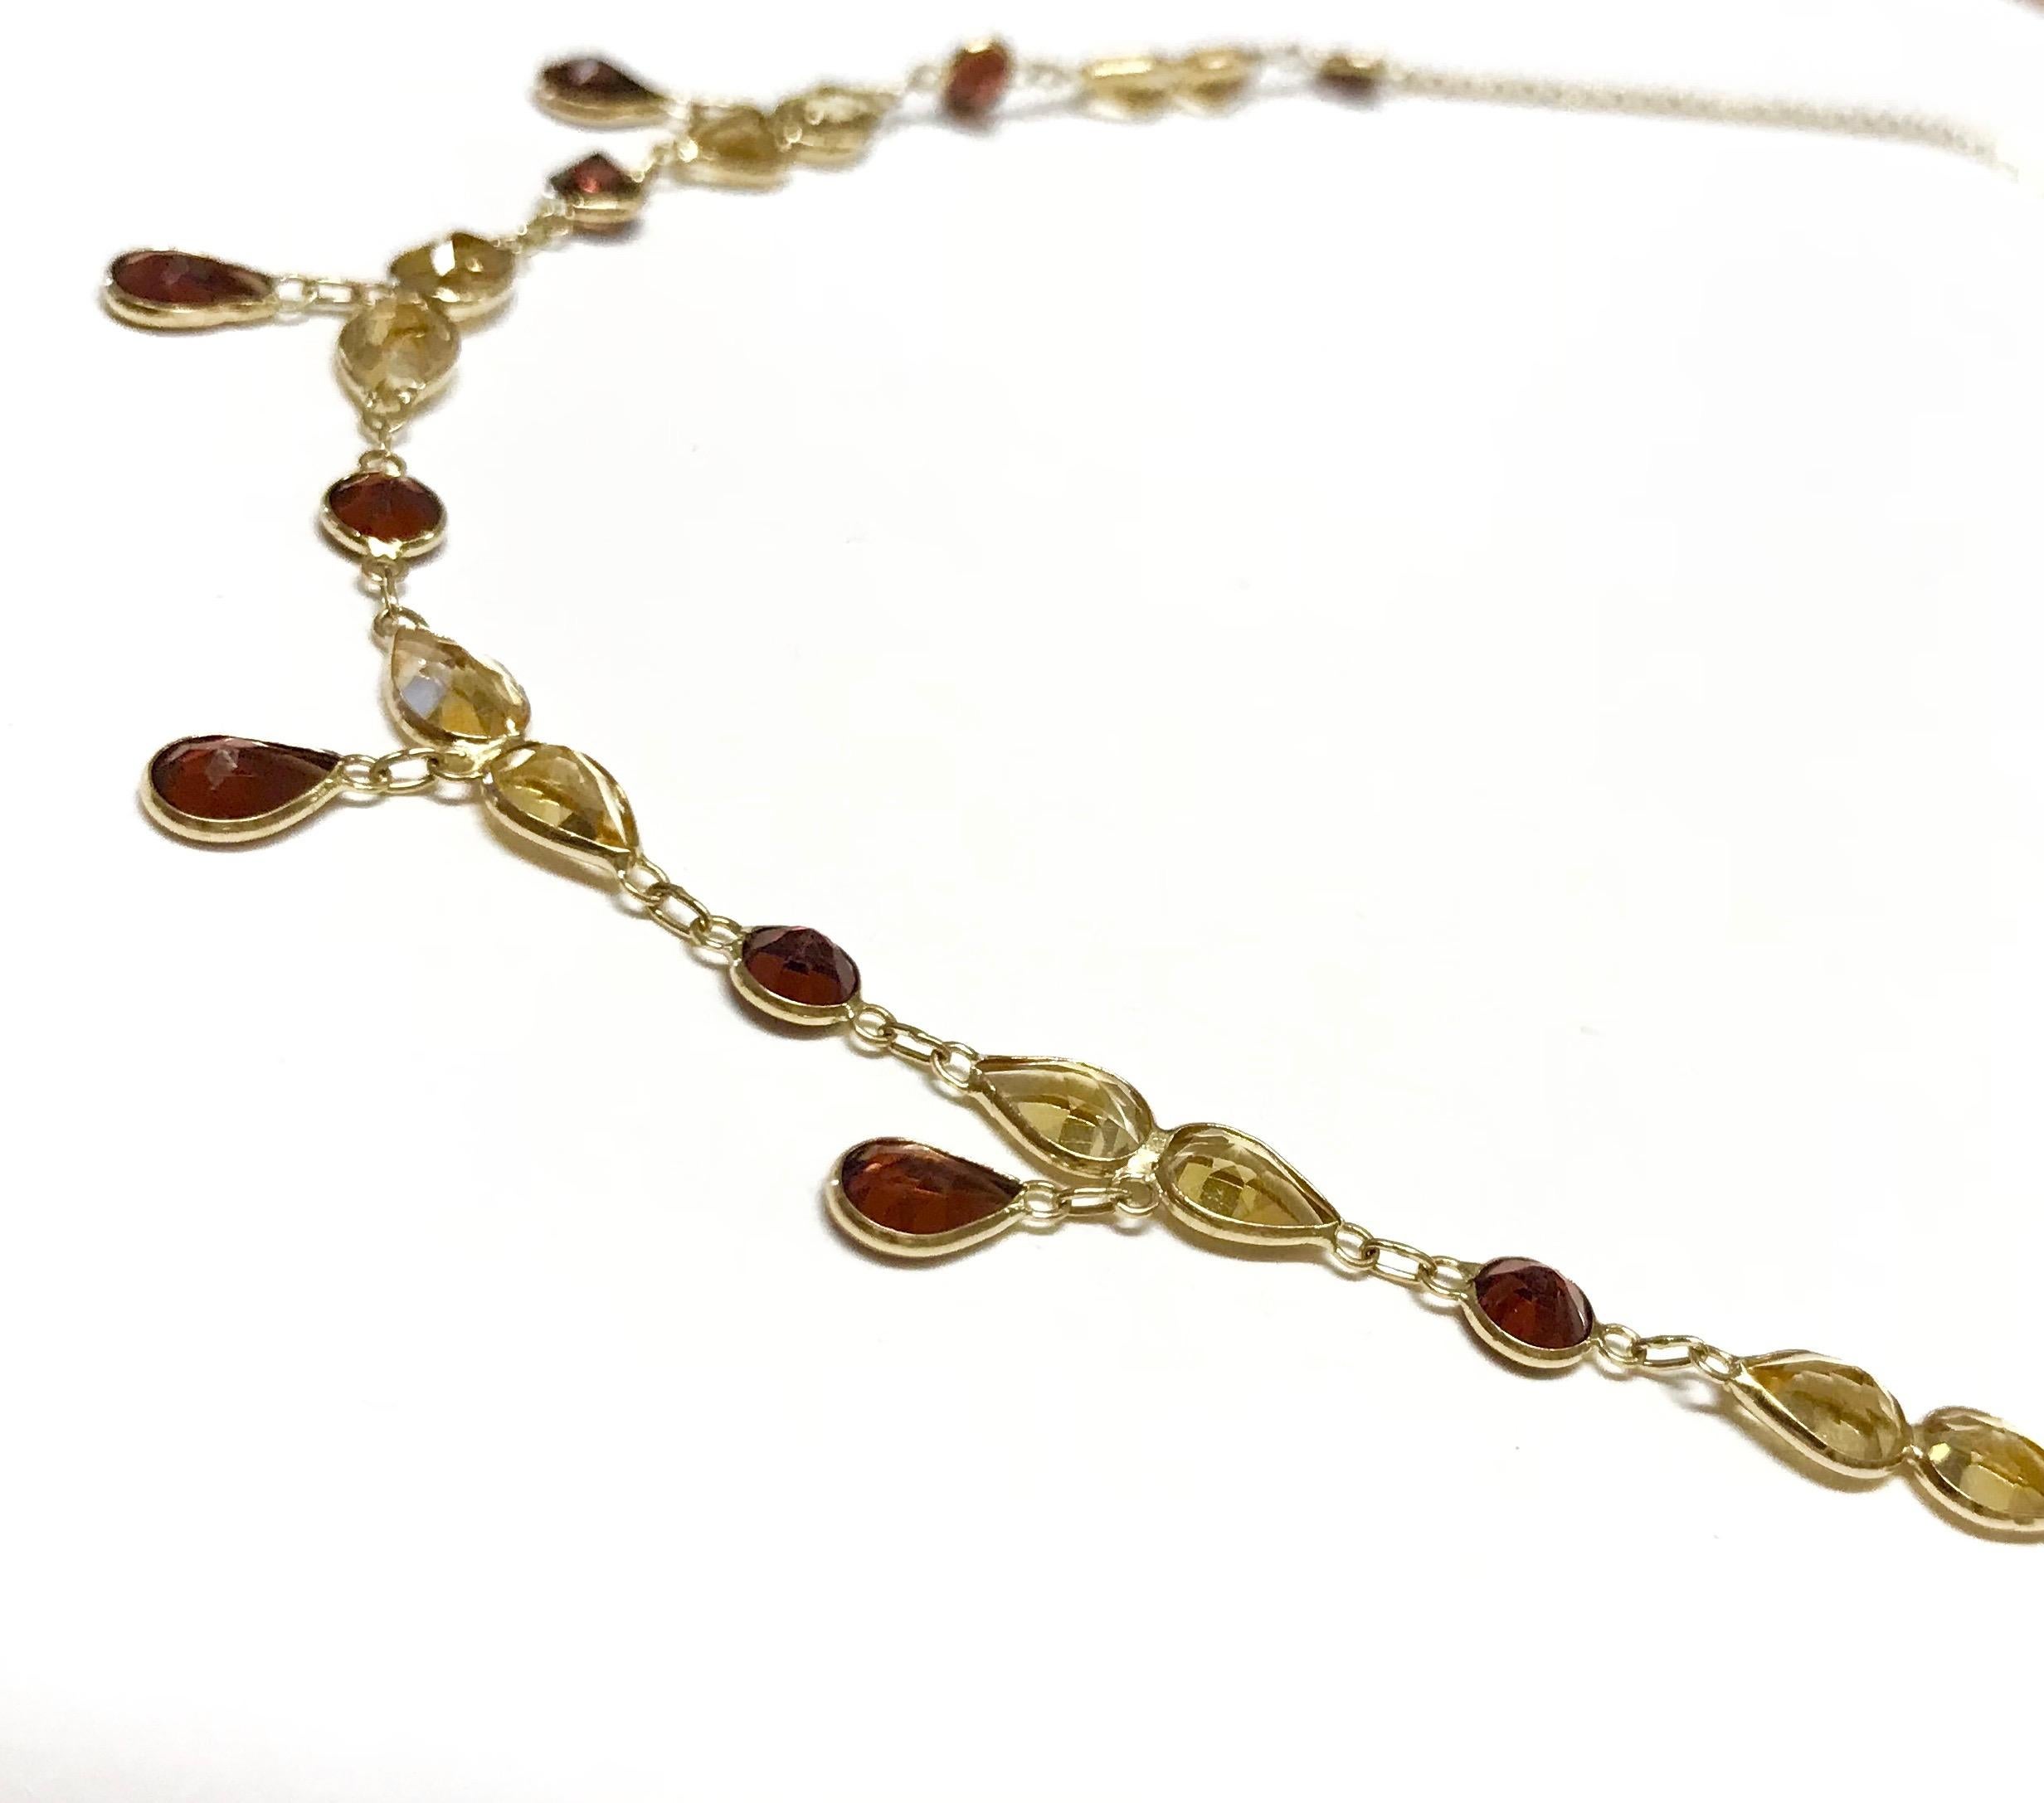 Fun & Bright, this 14K Yellow Gold chocker necklace is adorned with a blend of beautiful Citrine and Garnet stones.

Material: 14k Yellow Gold 
Stone Details: 23 Fancy Cut Citrine & Garnet
Length:  16 Inch (Adjustable)

Fine one-of-a-kind